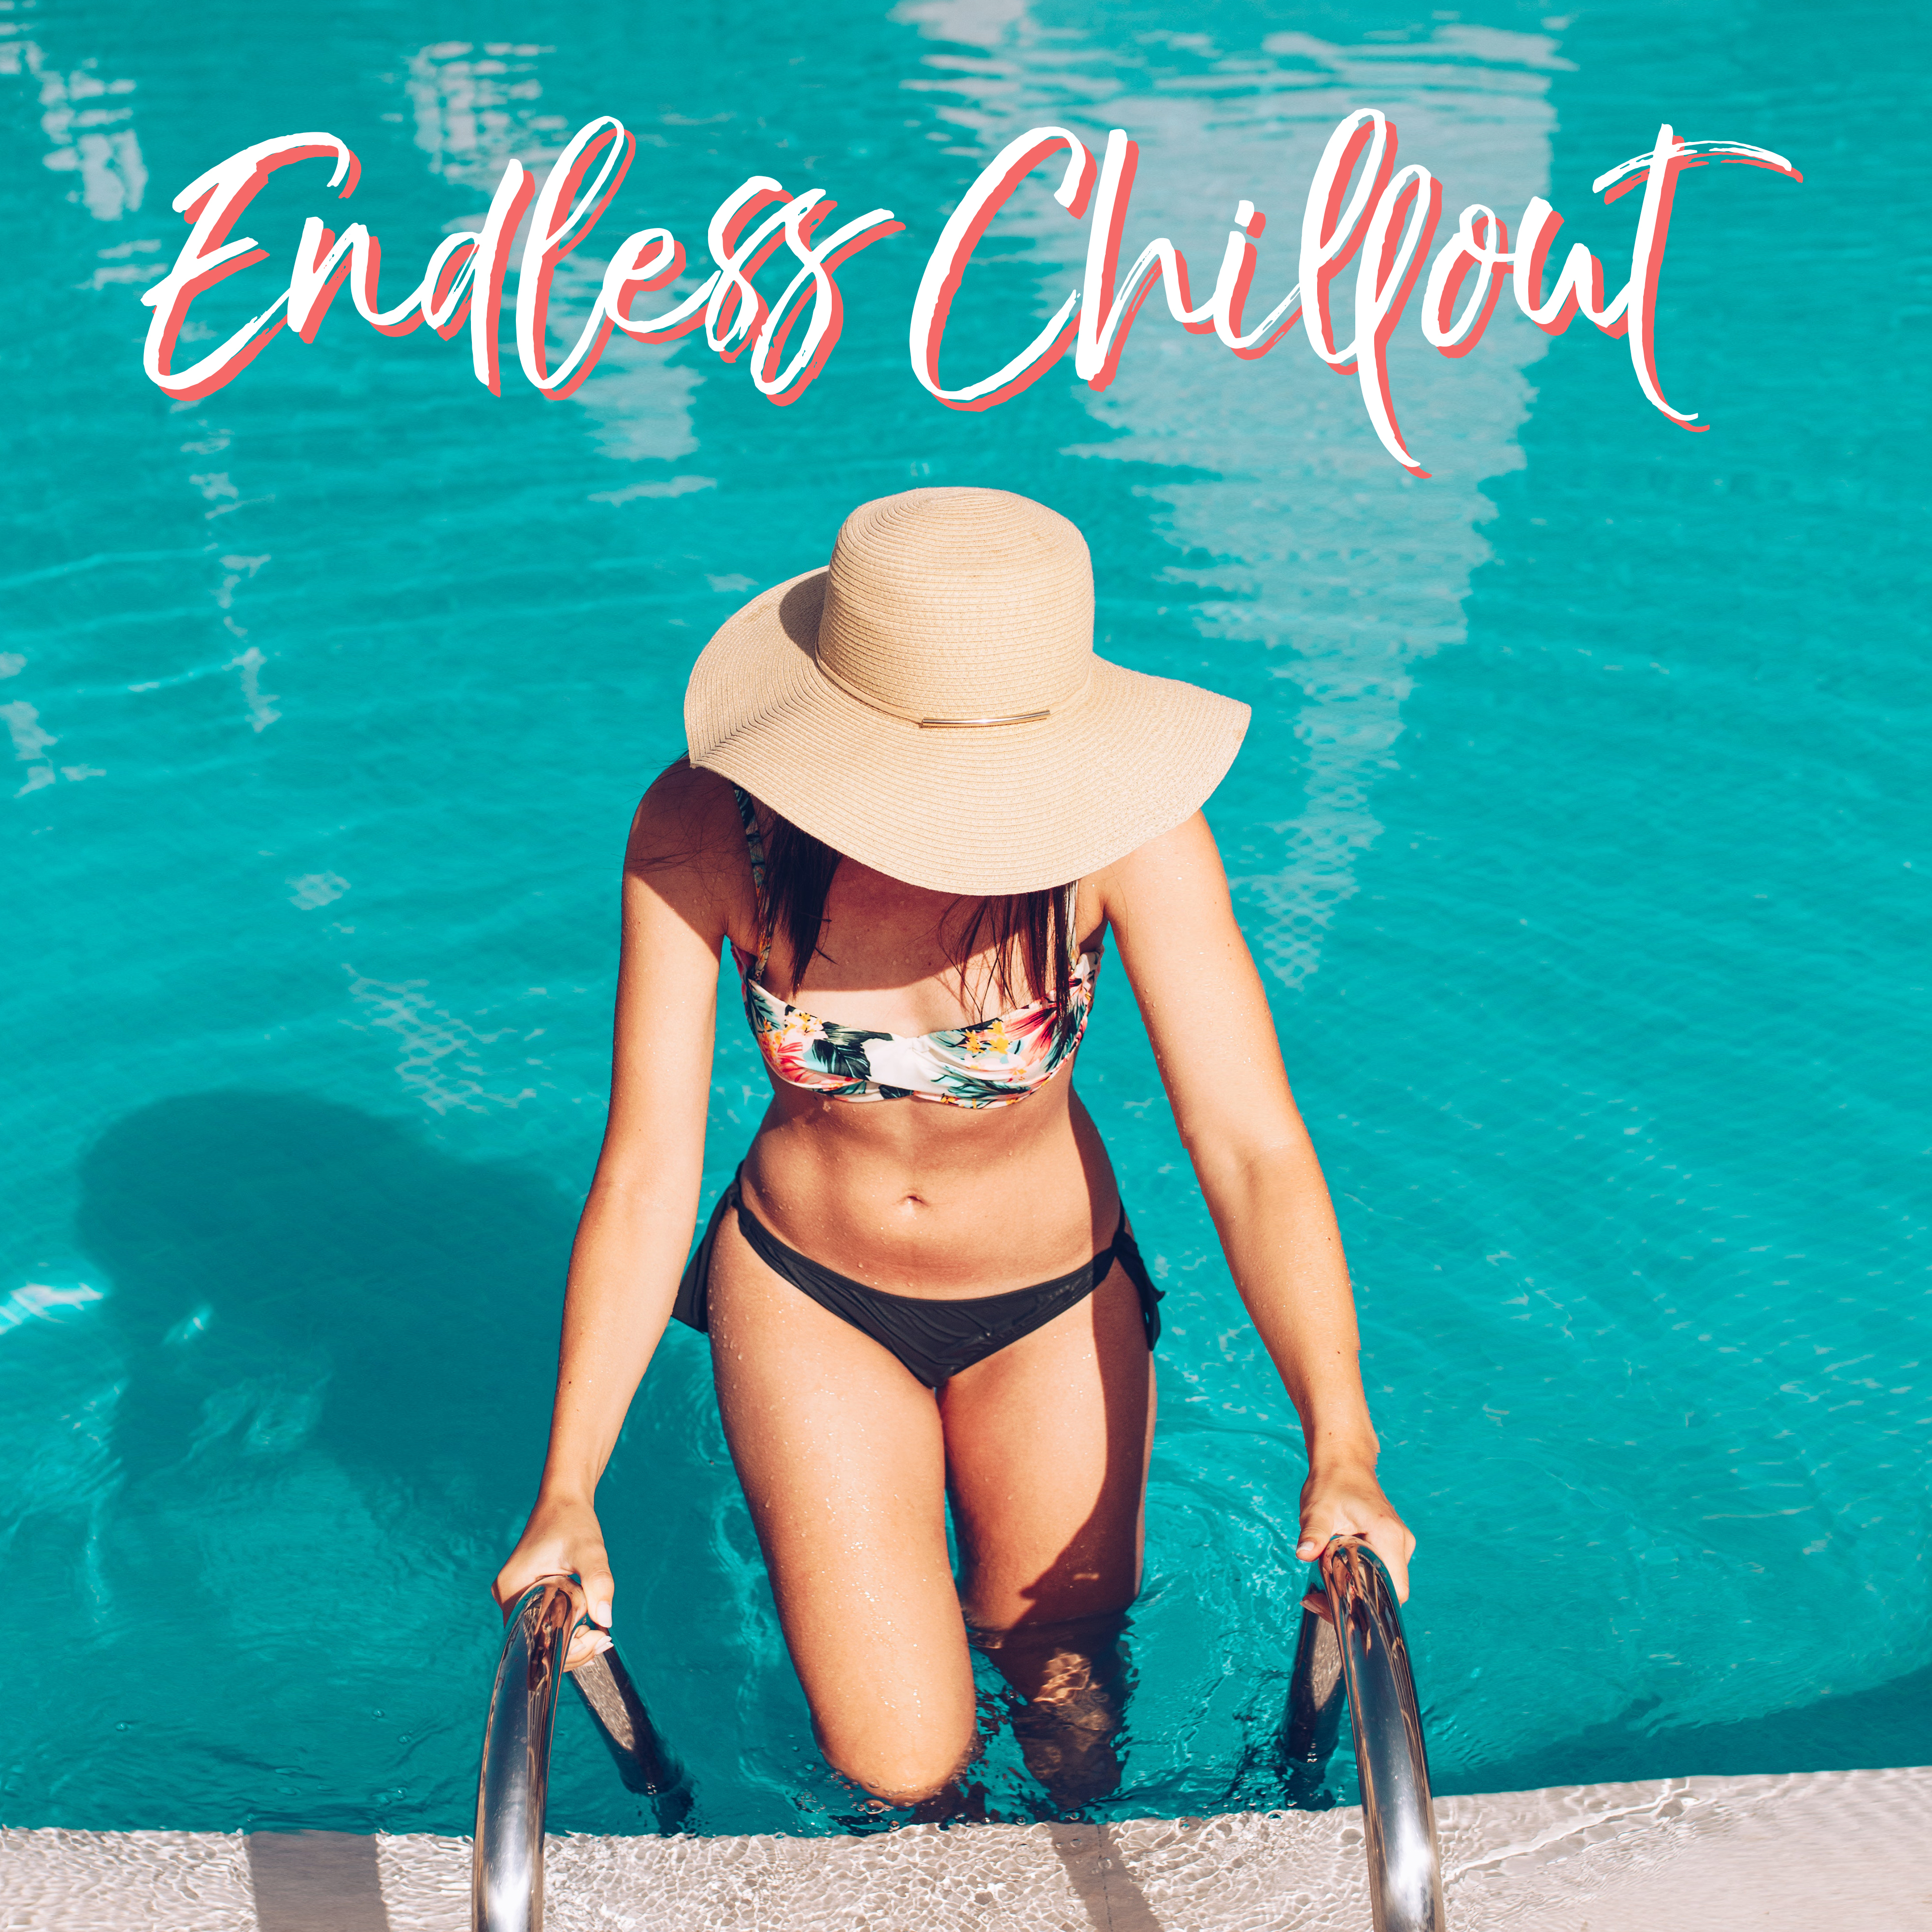 Endless Chillout: Chillin Music for Home Relaxation and Rest